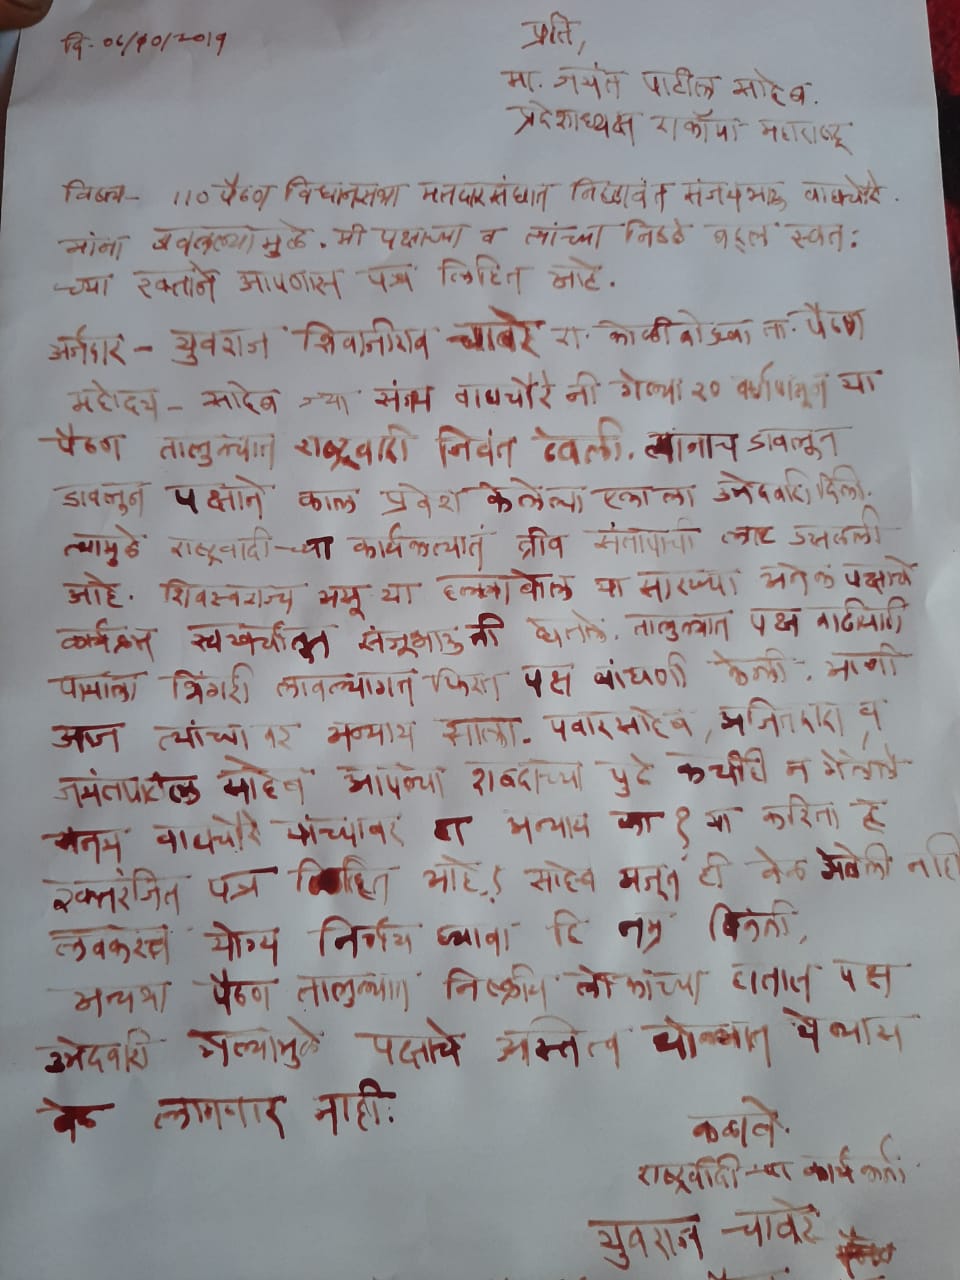 NCP activist wrote letter from blood